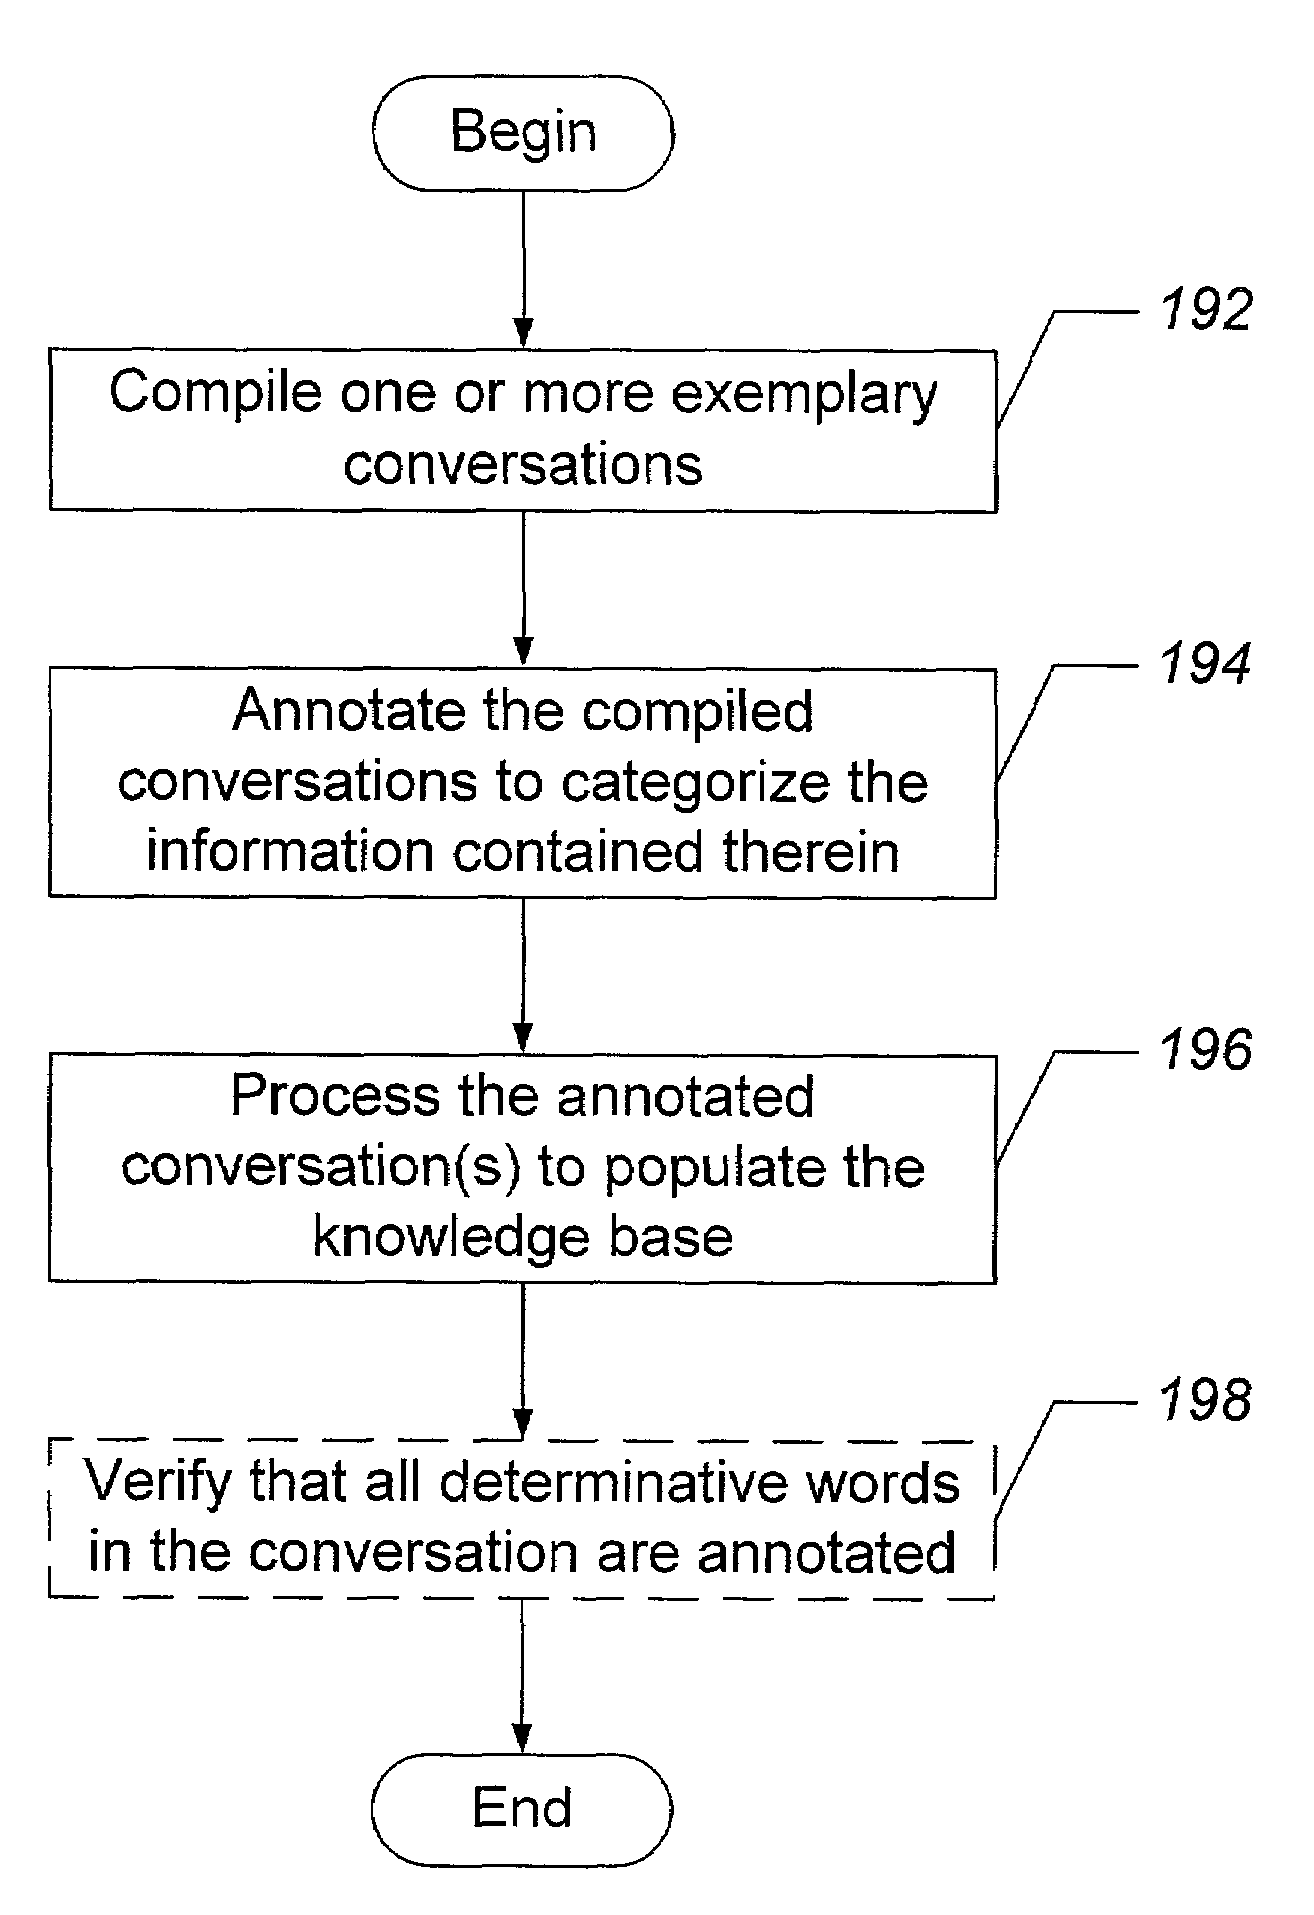 Methods, systems, and computer program products for providing automated customer service via an intelligent virtual agent that is trained using customer-agent conversations